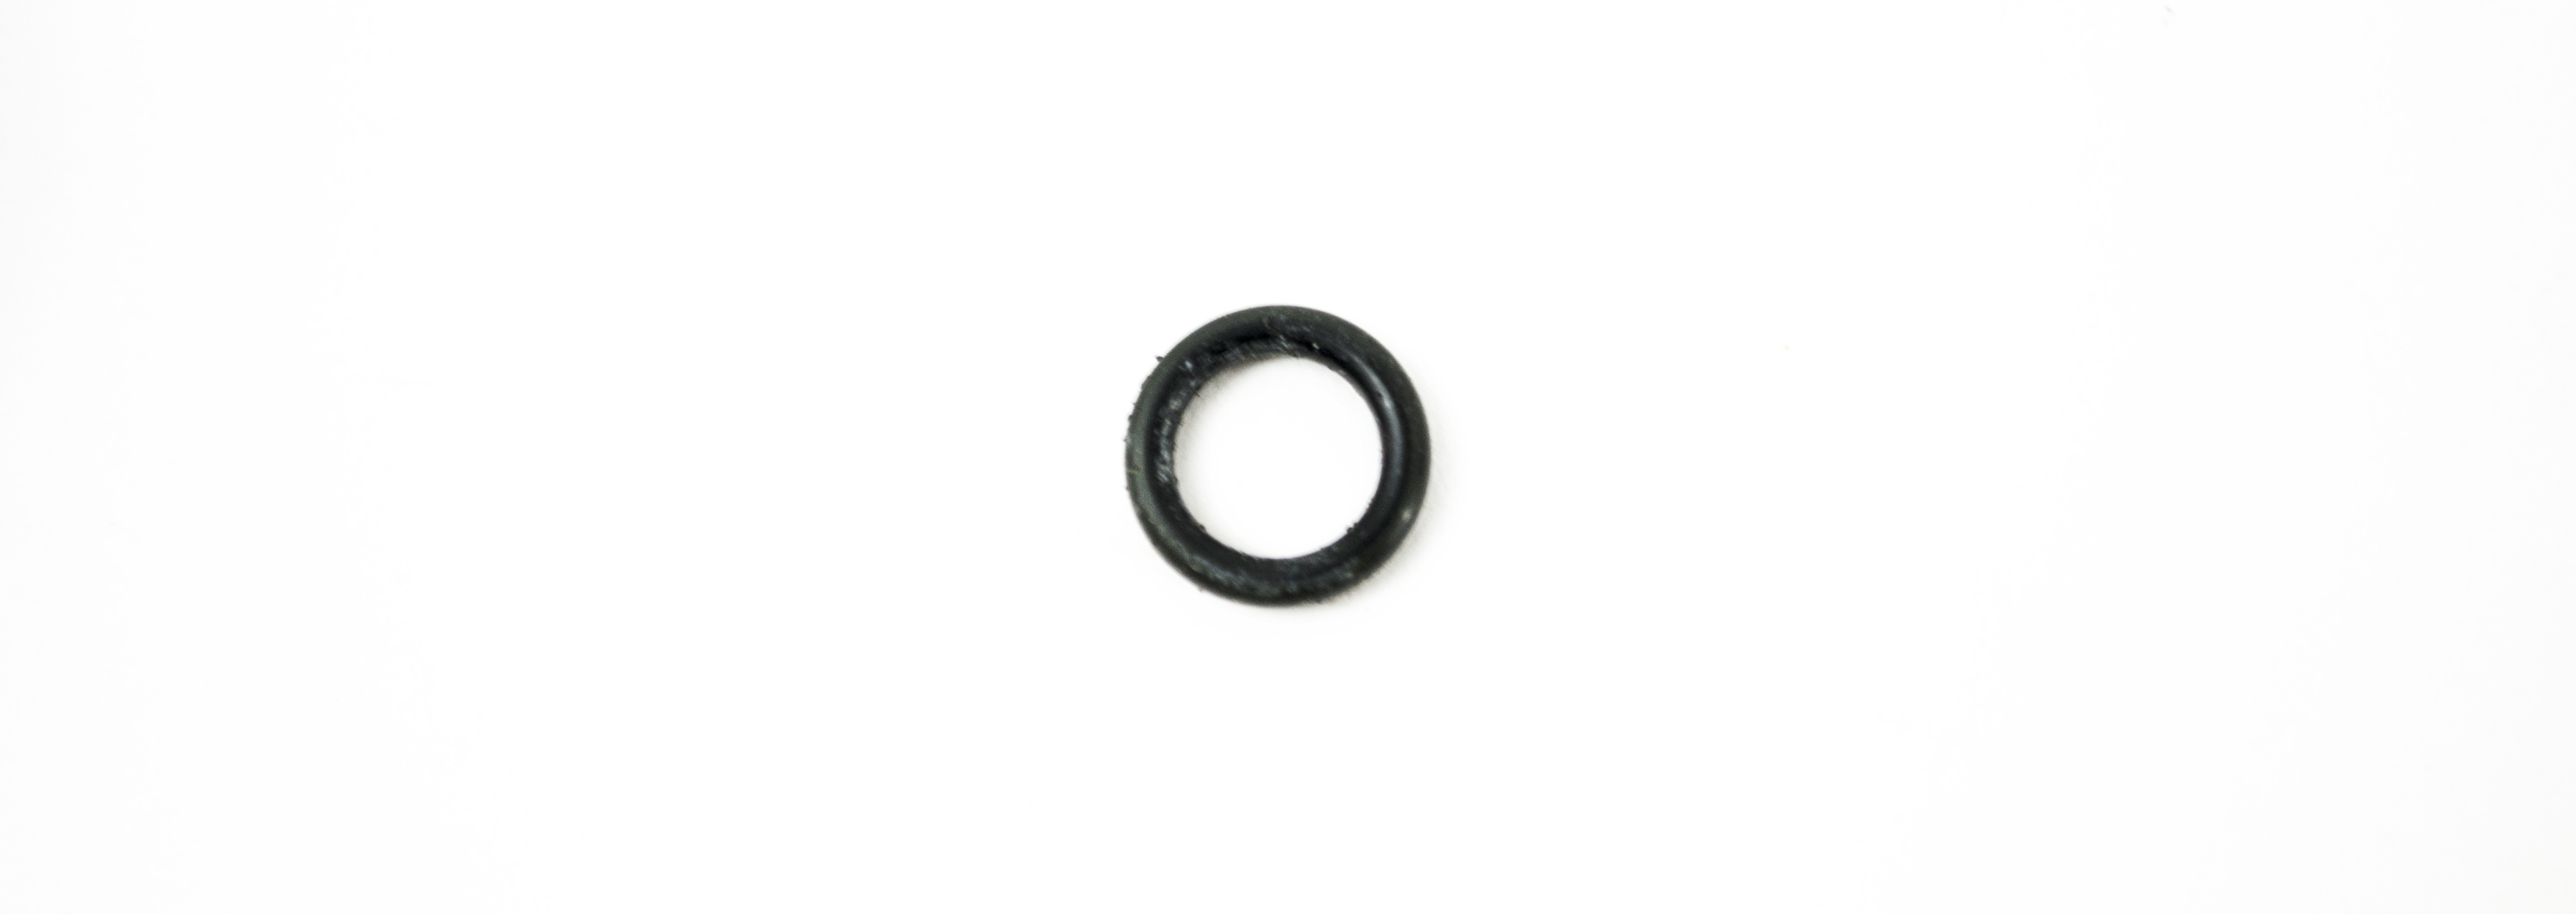 OEM O-Ring: Biopsy Port Therapeutic (Distal End) - GIF-2T100, GIF-2T20